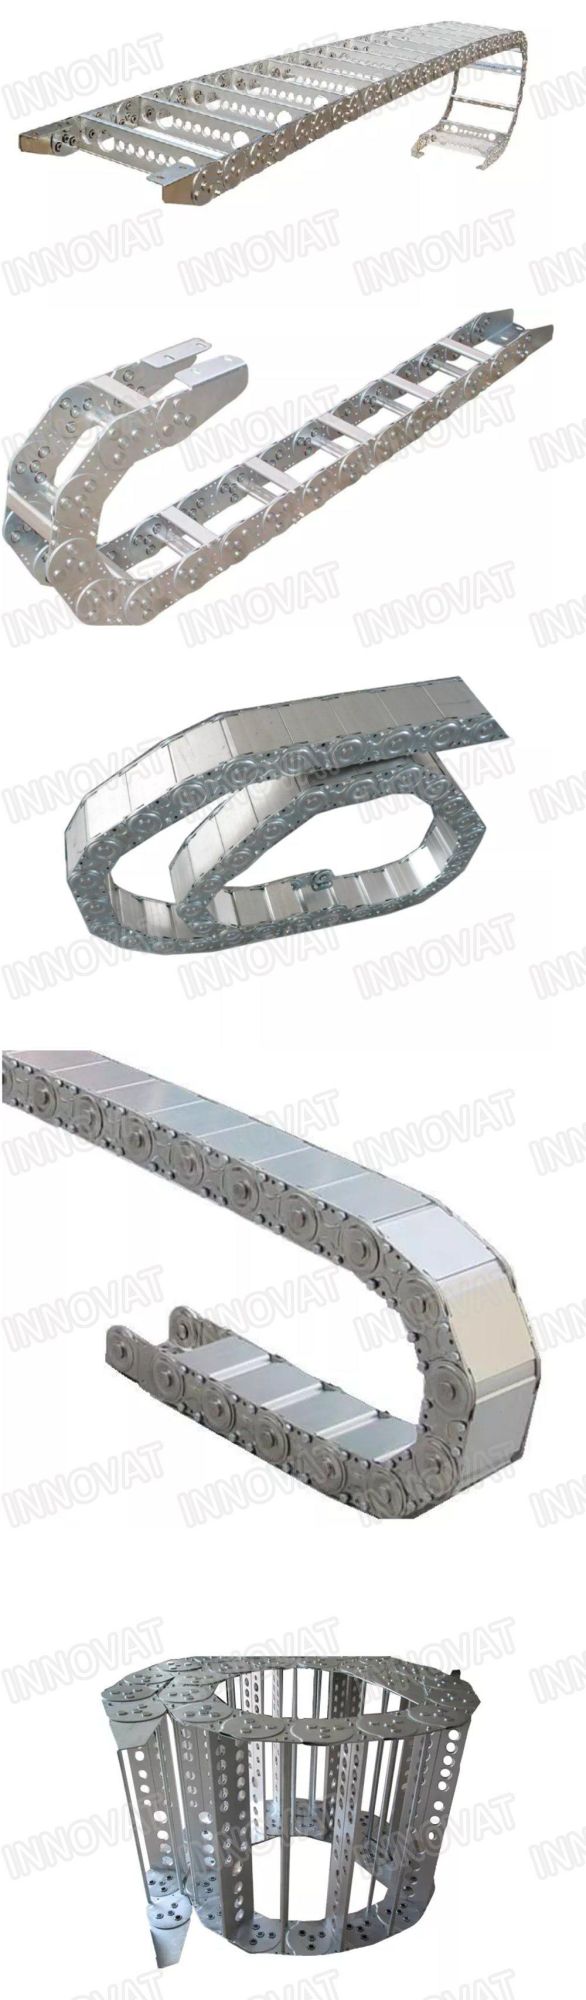 Steel Tl115 Steel Flexible Cable Tray Energy Chains